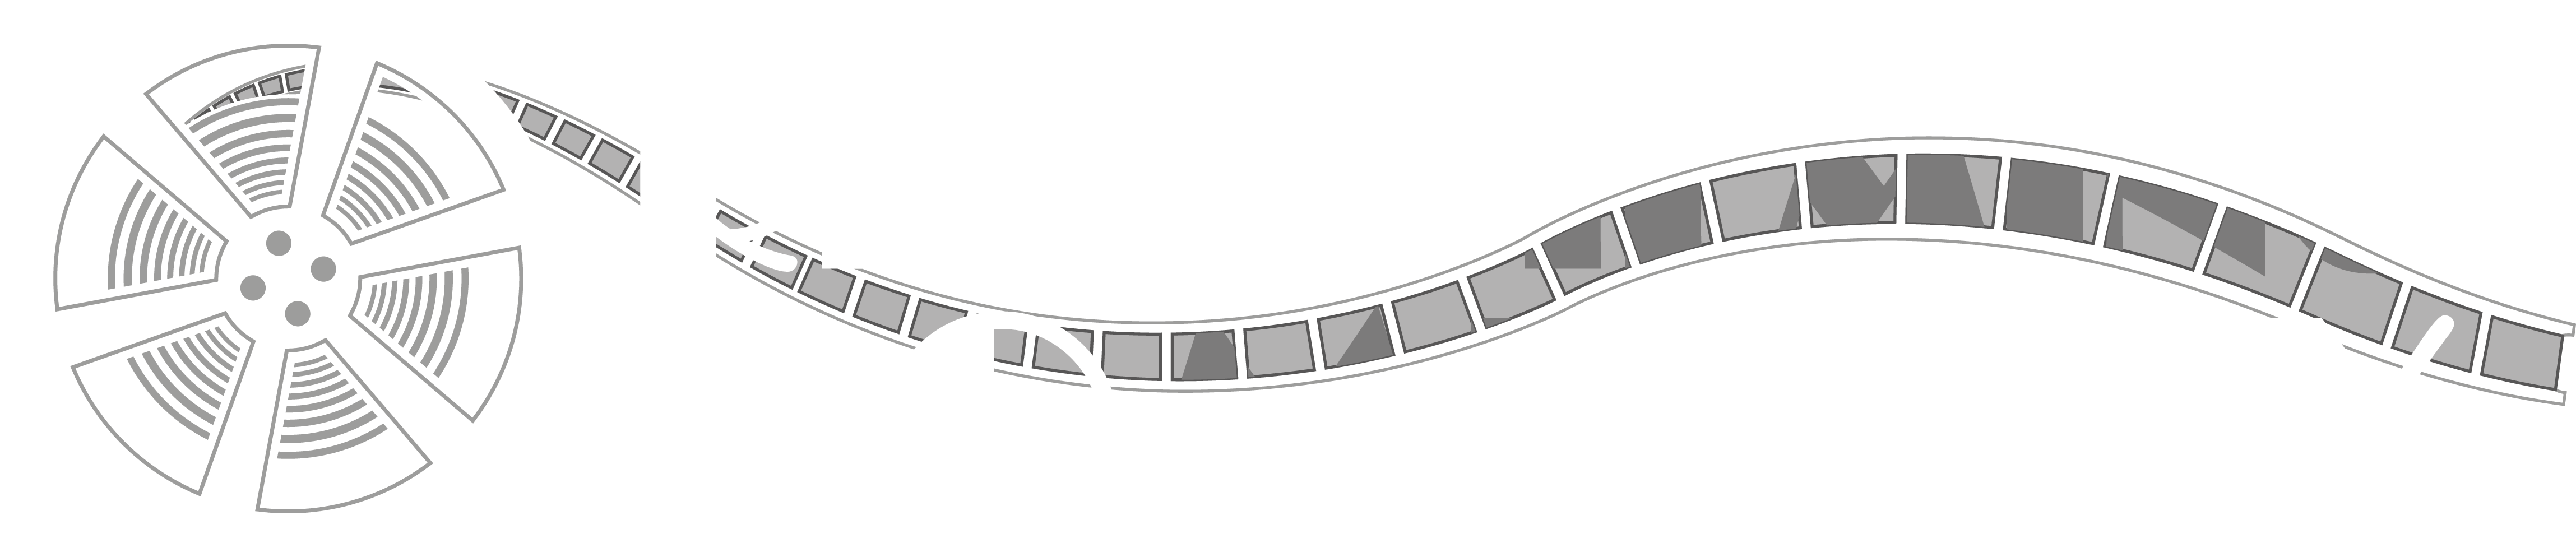 The Reel Filming Company